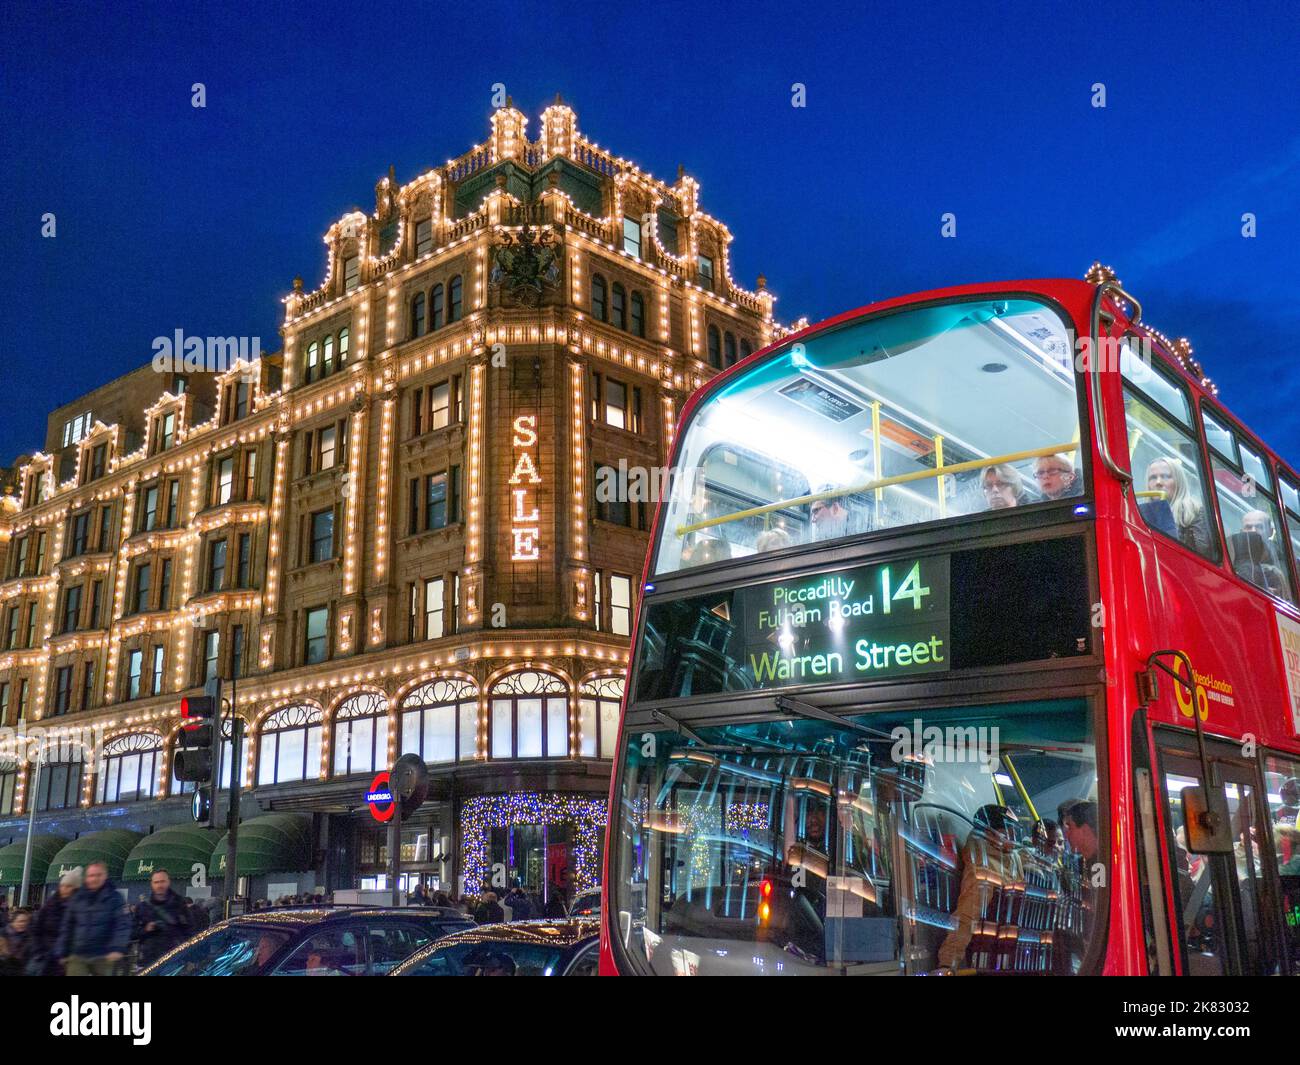 SALES BUS TRANSPORT LONDON SHOPPING Harrods department store at winter night dusk with Sale lights shoppers passing taxis and red bus in foreground on route 14 Knightsbridge London SW1 Stock Photo